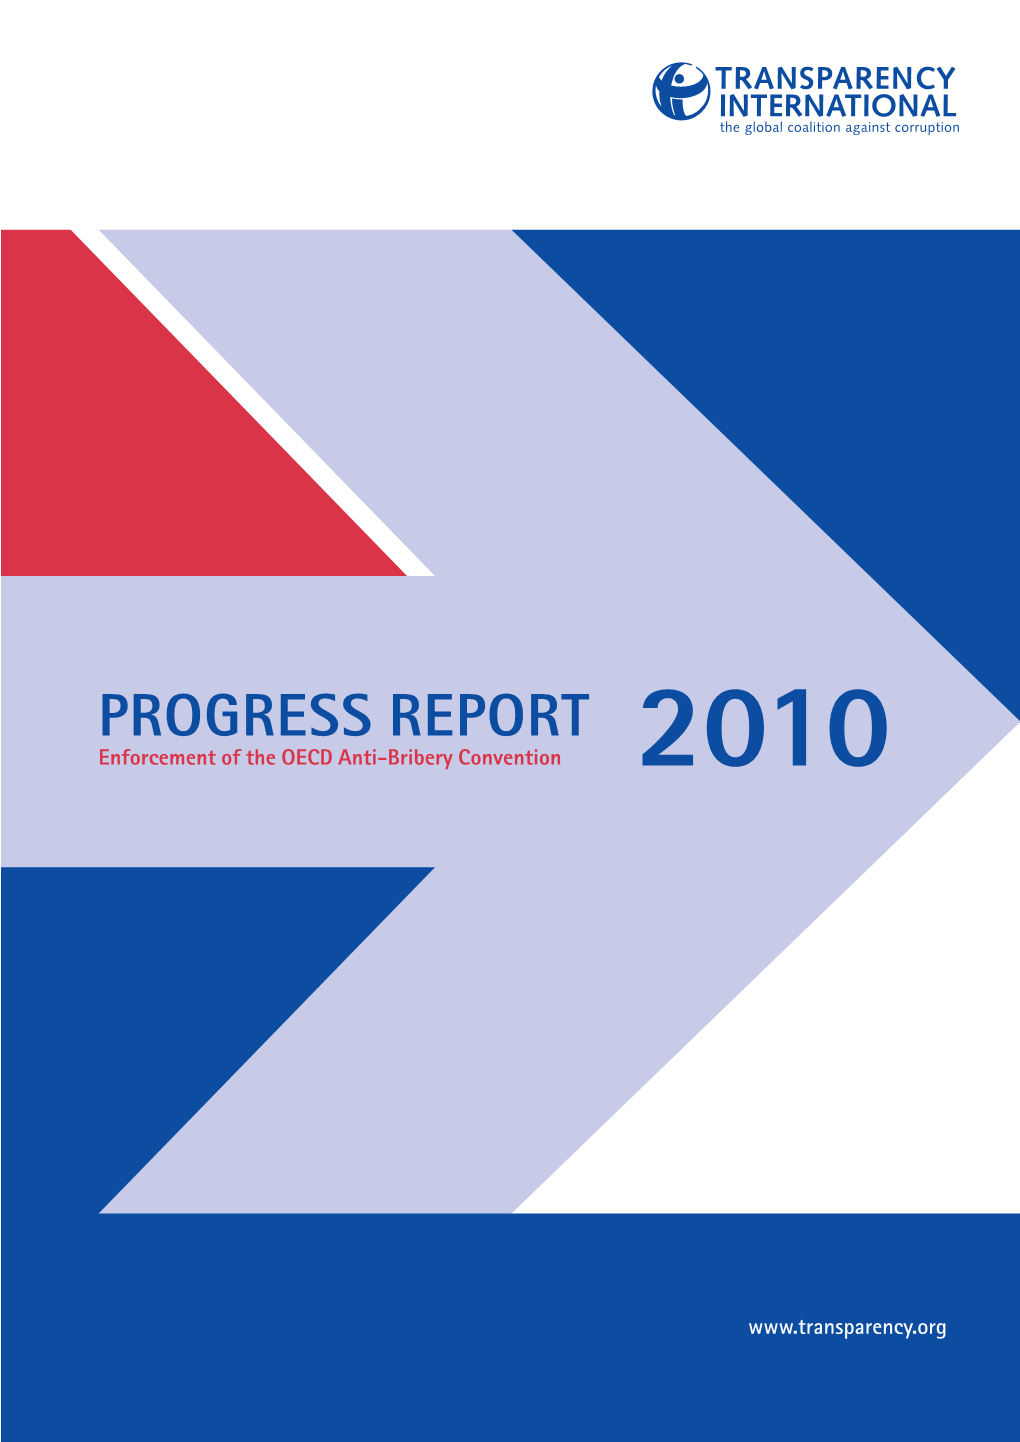 PROGRESS REPORT Enforcement of the OECD Anti-Bribery Convention 2010